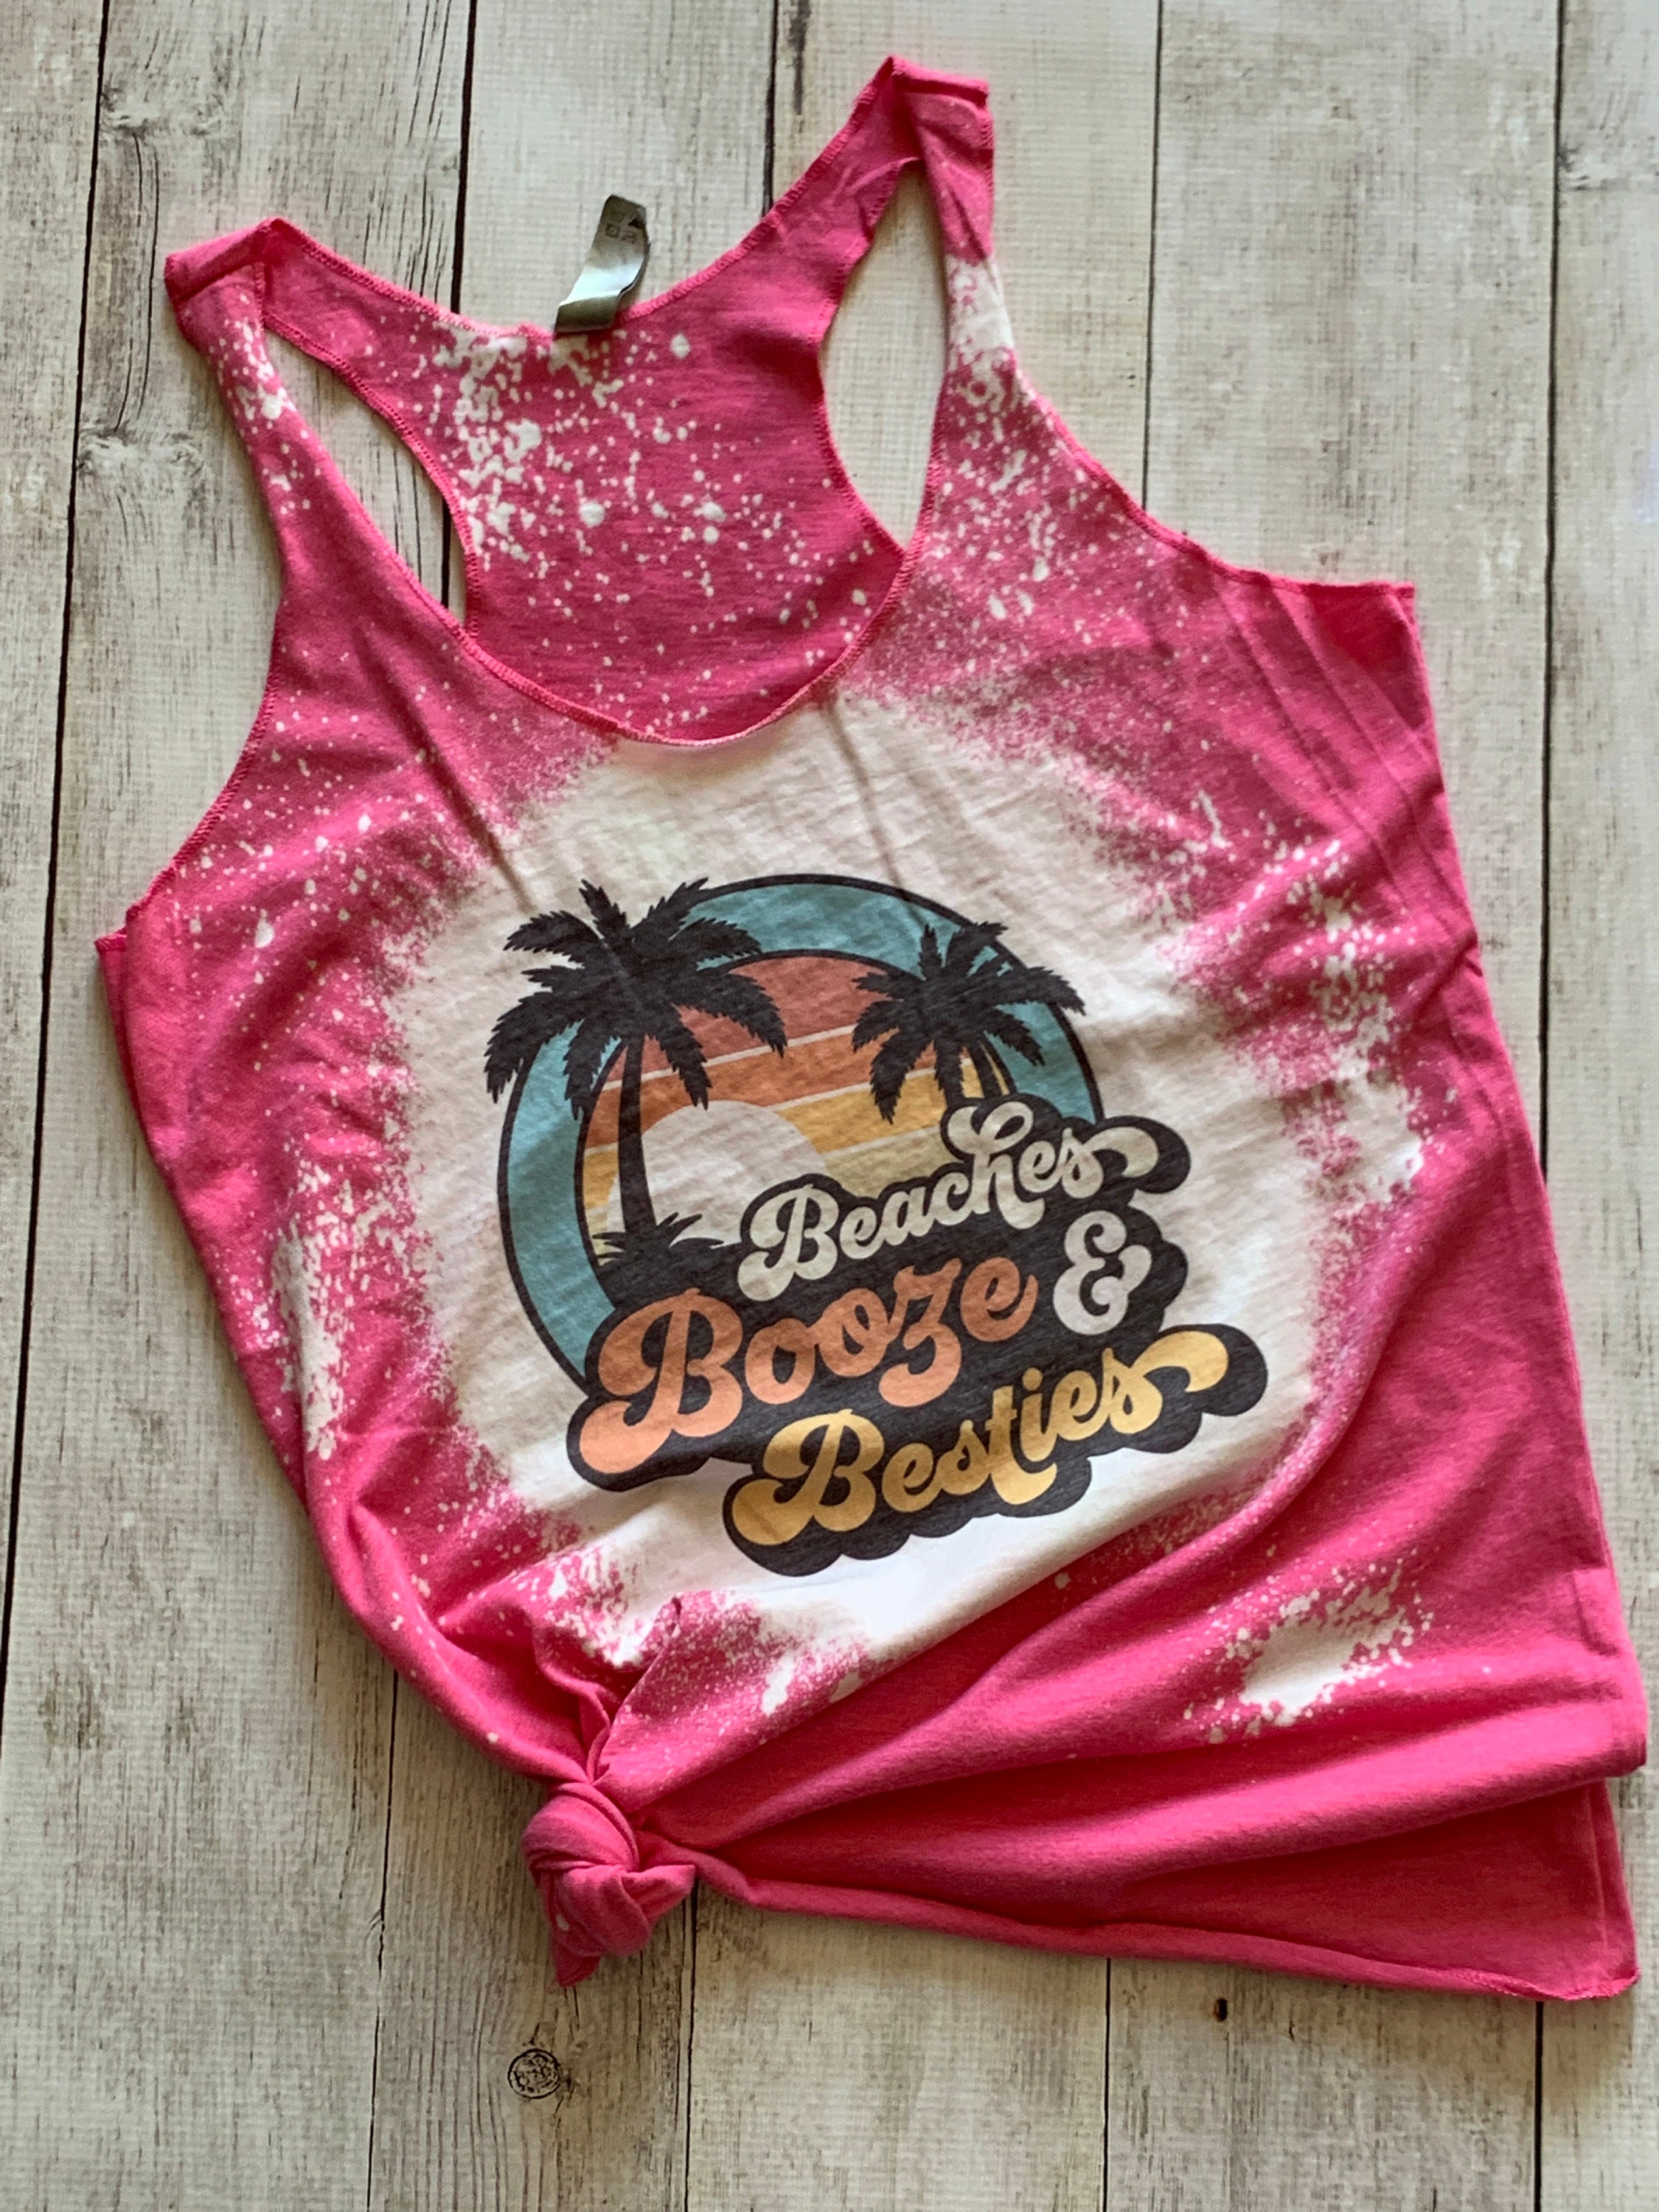 Beaches Booze and Besties Tank Bleached Tank Girls Trip | Etsy